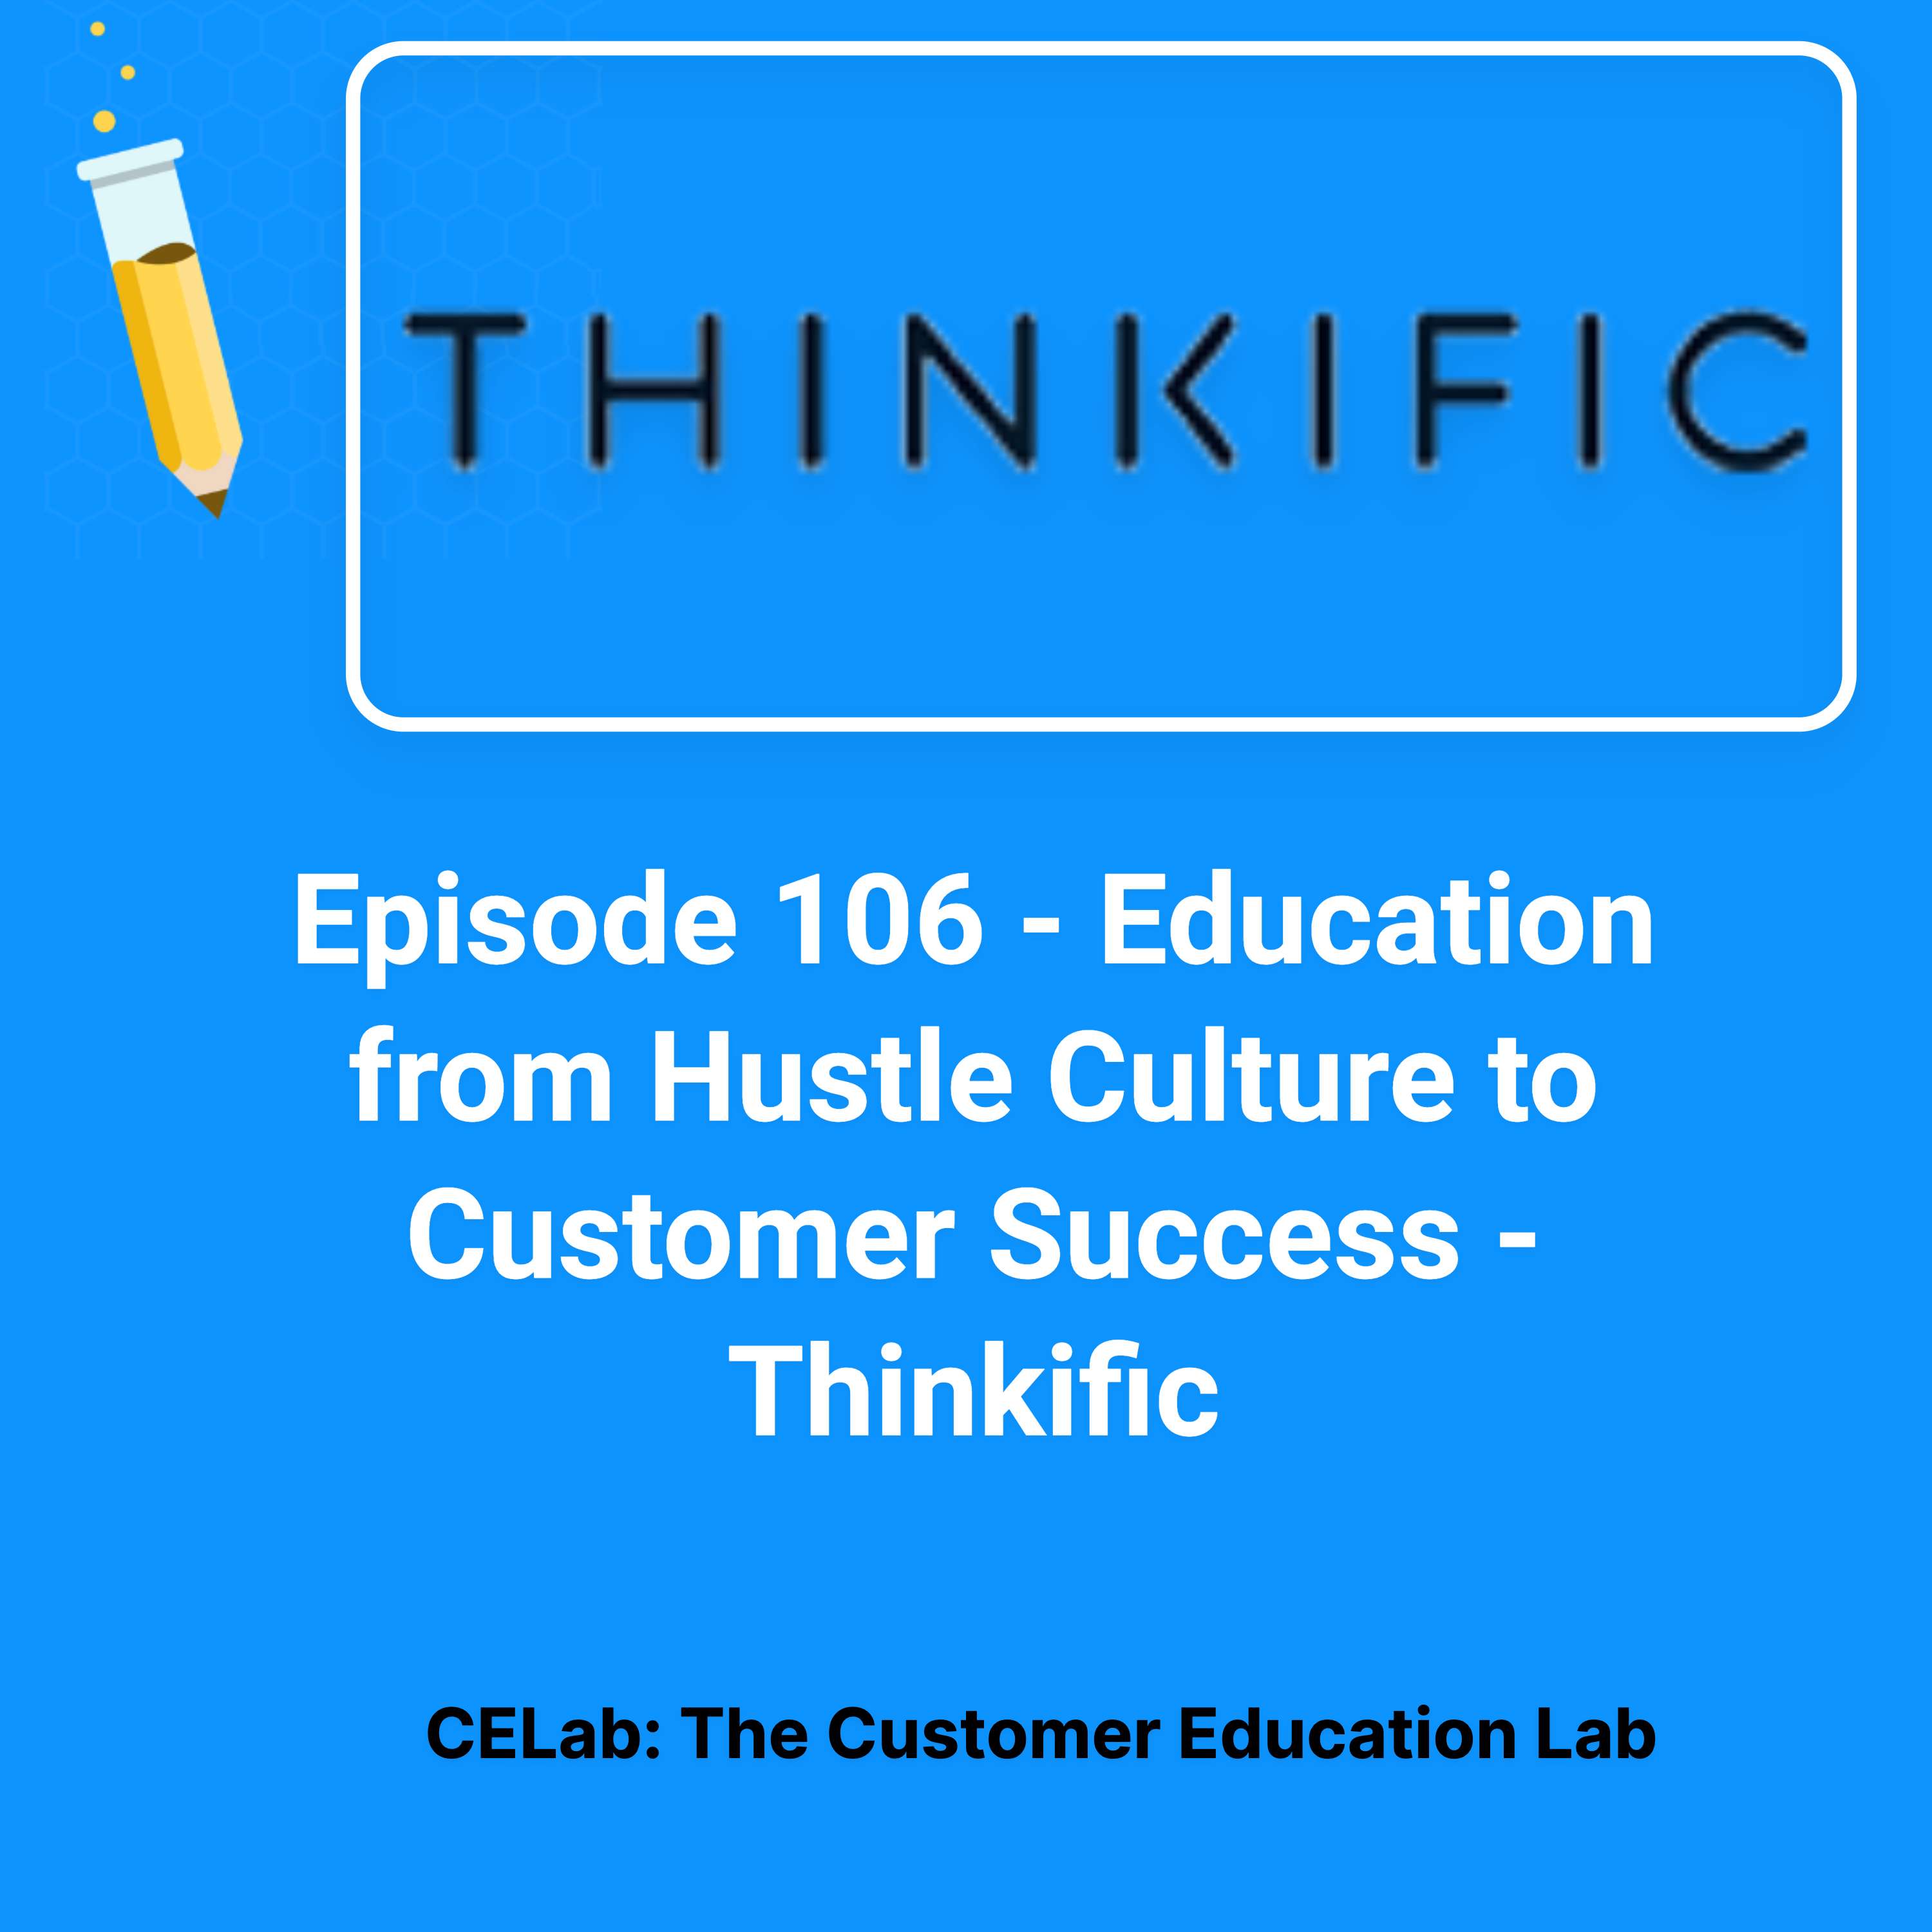 Episode 106 - Aaron Morin @ Thinkific - Education from Hustle Culture to Customer Success